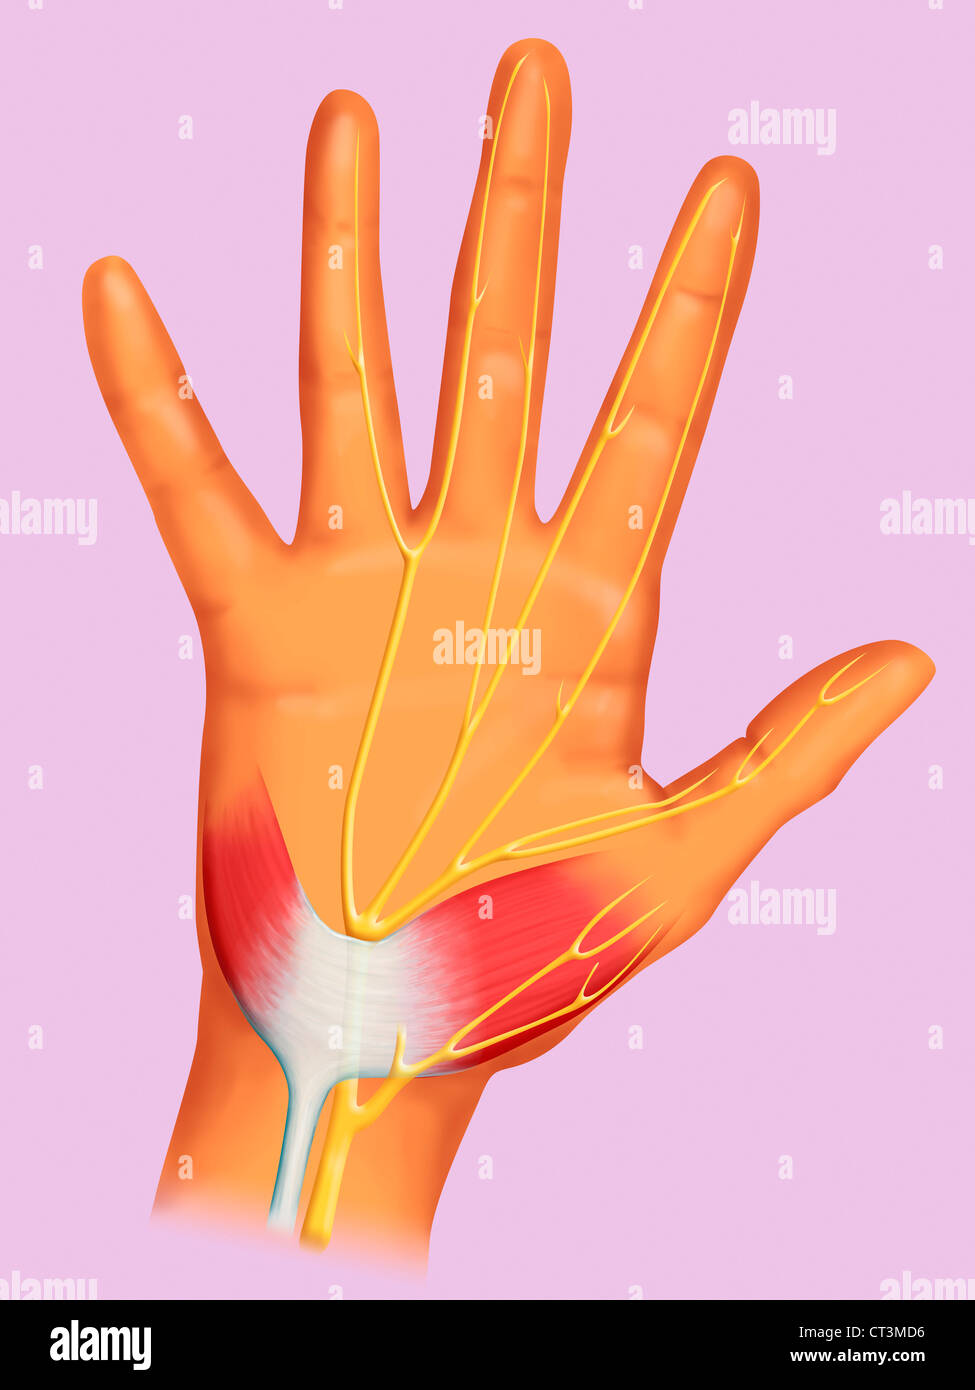 CARPAL TUNNEL, DRAWING Stock Photo